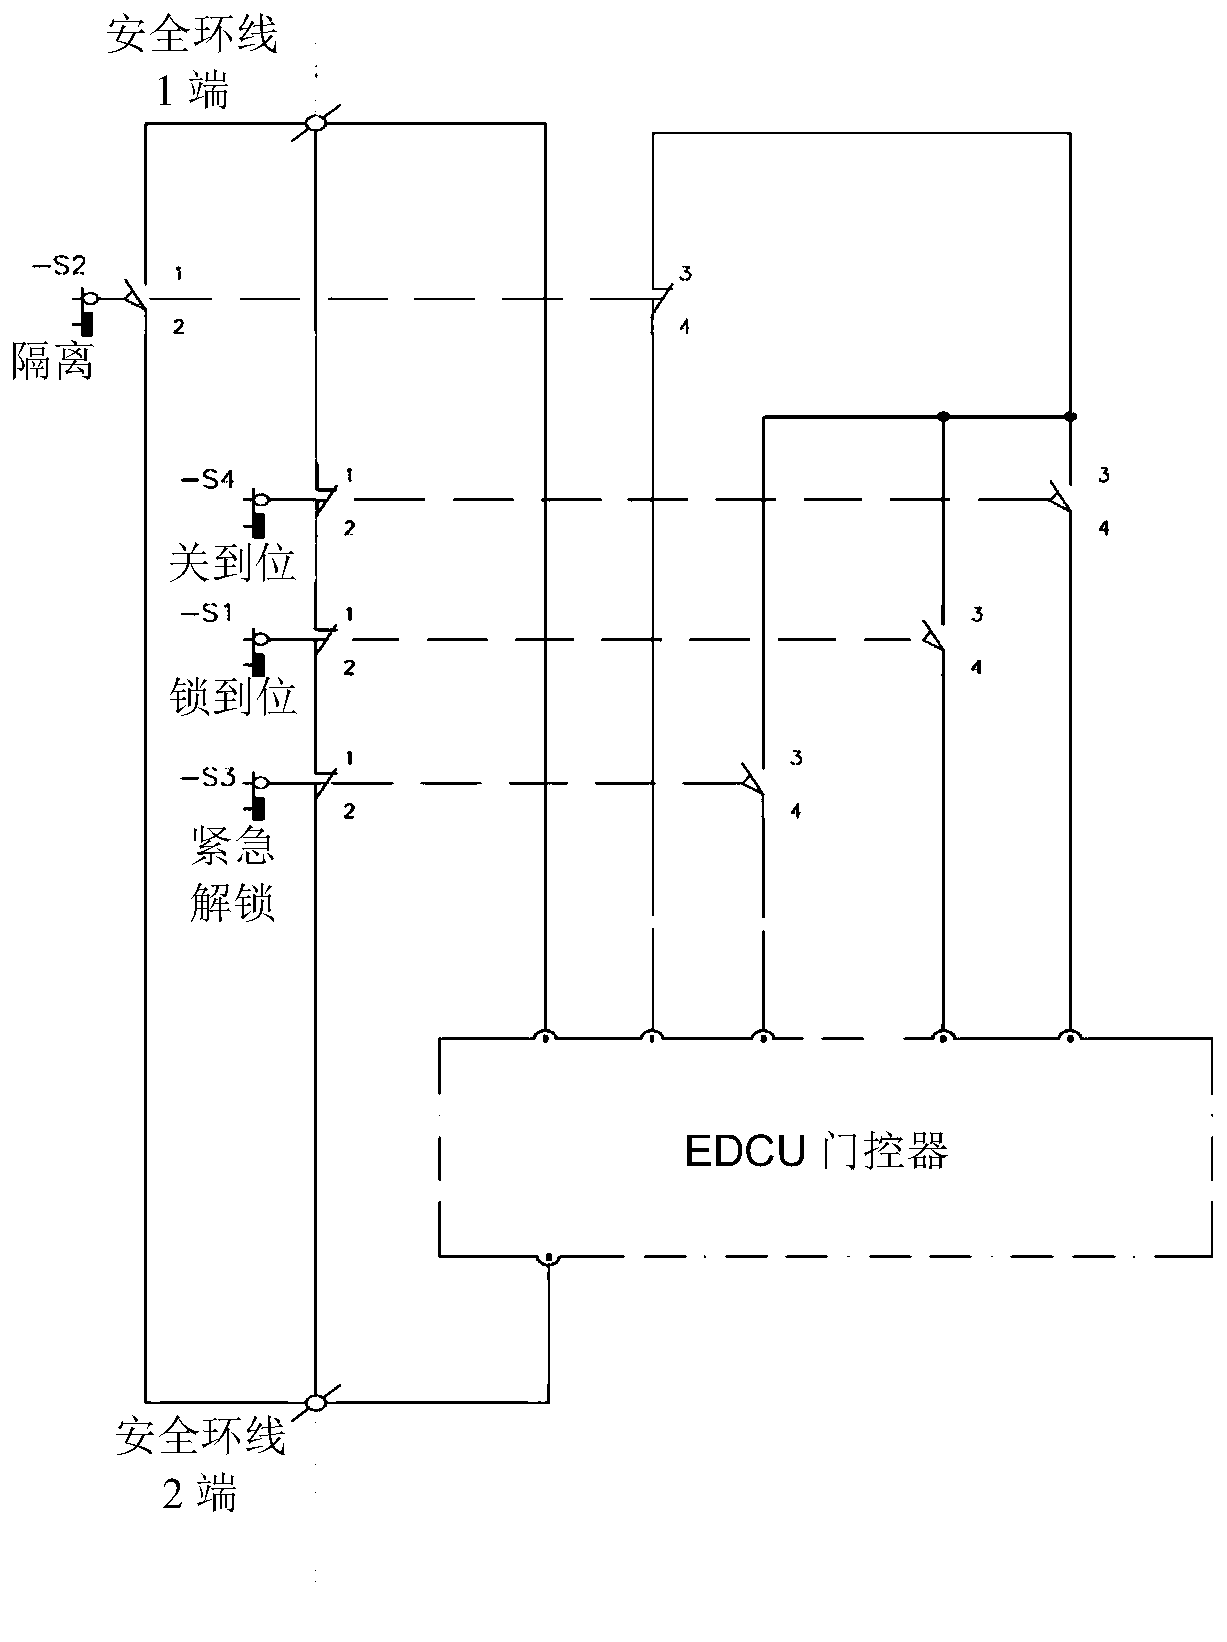 Vehicle door safety loop line fault point detection system and fault judging method